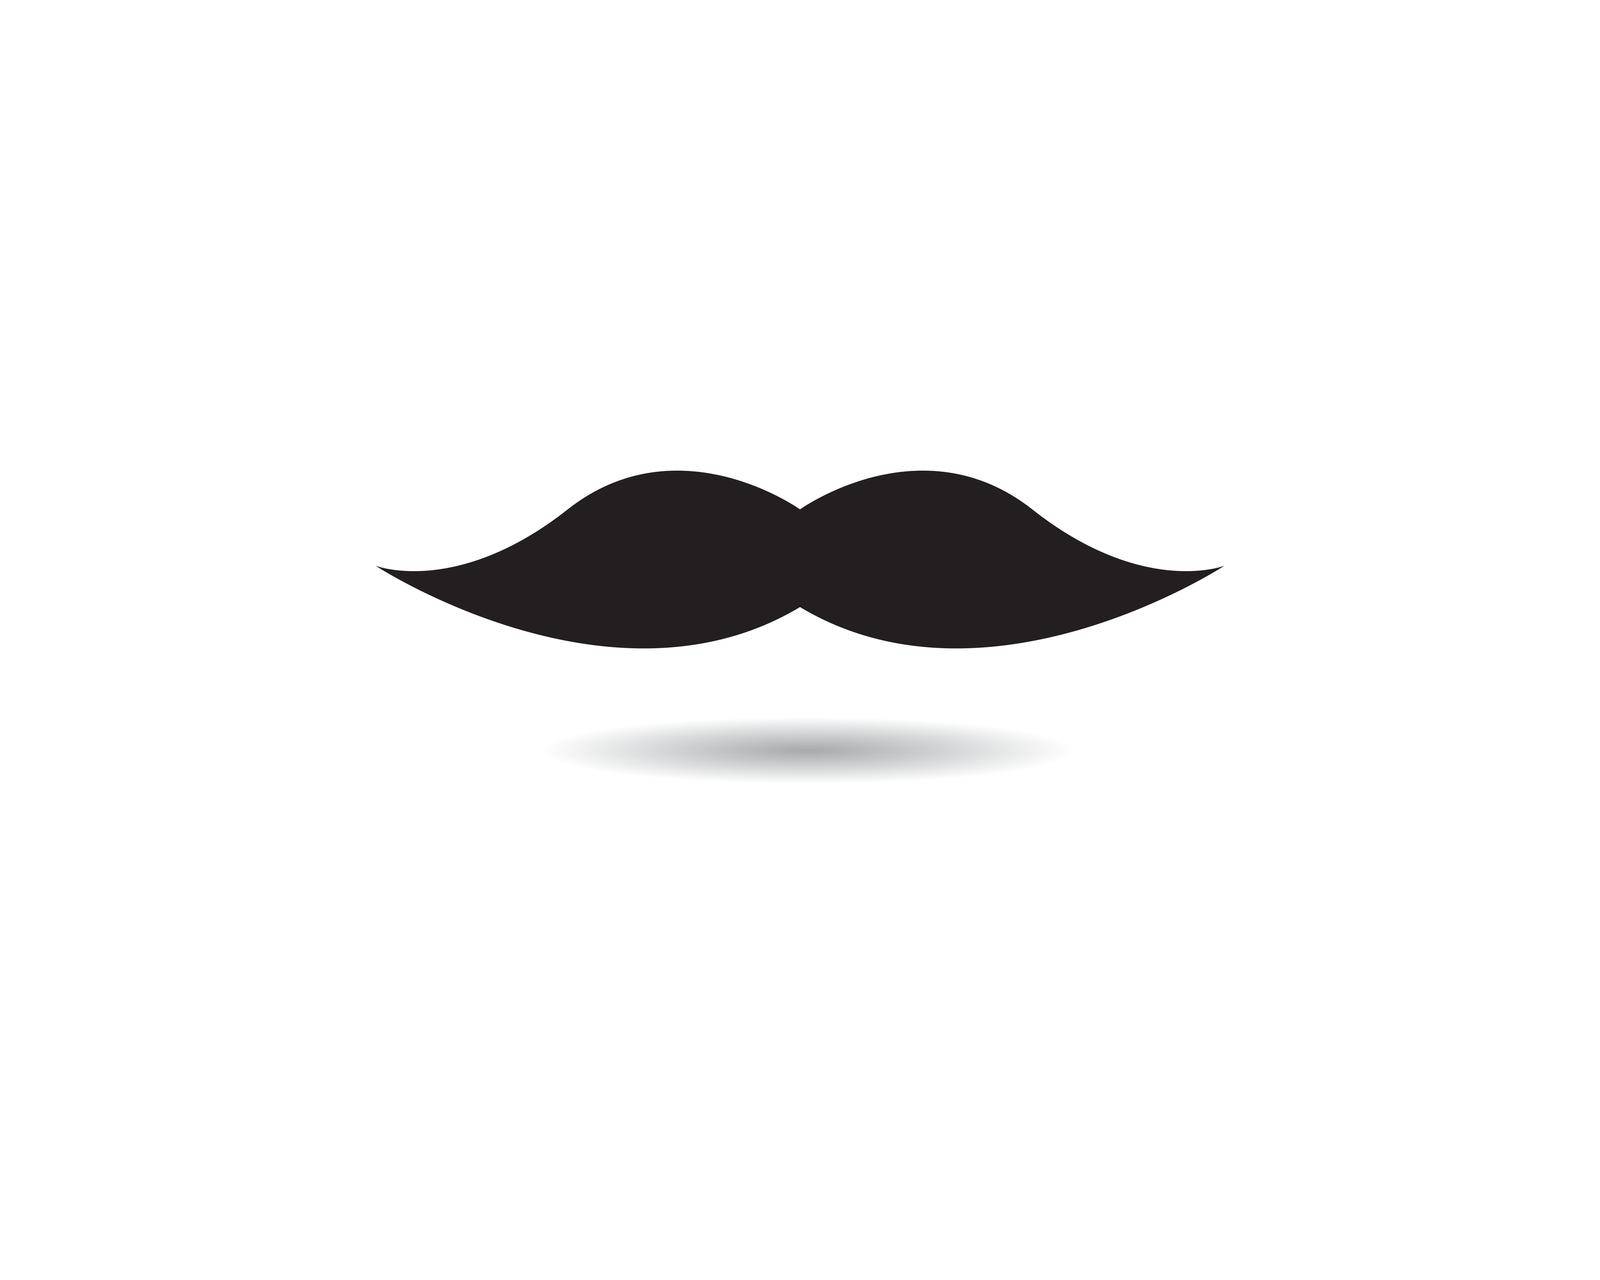 Mustache icon vector illustration by Fat17